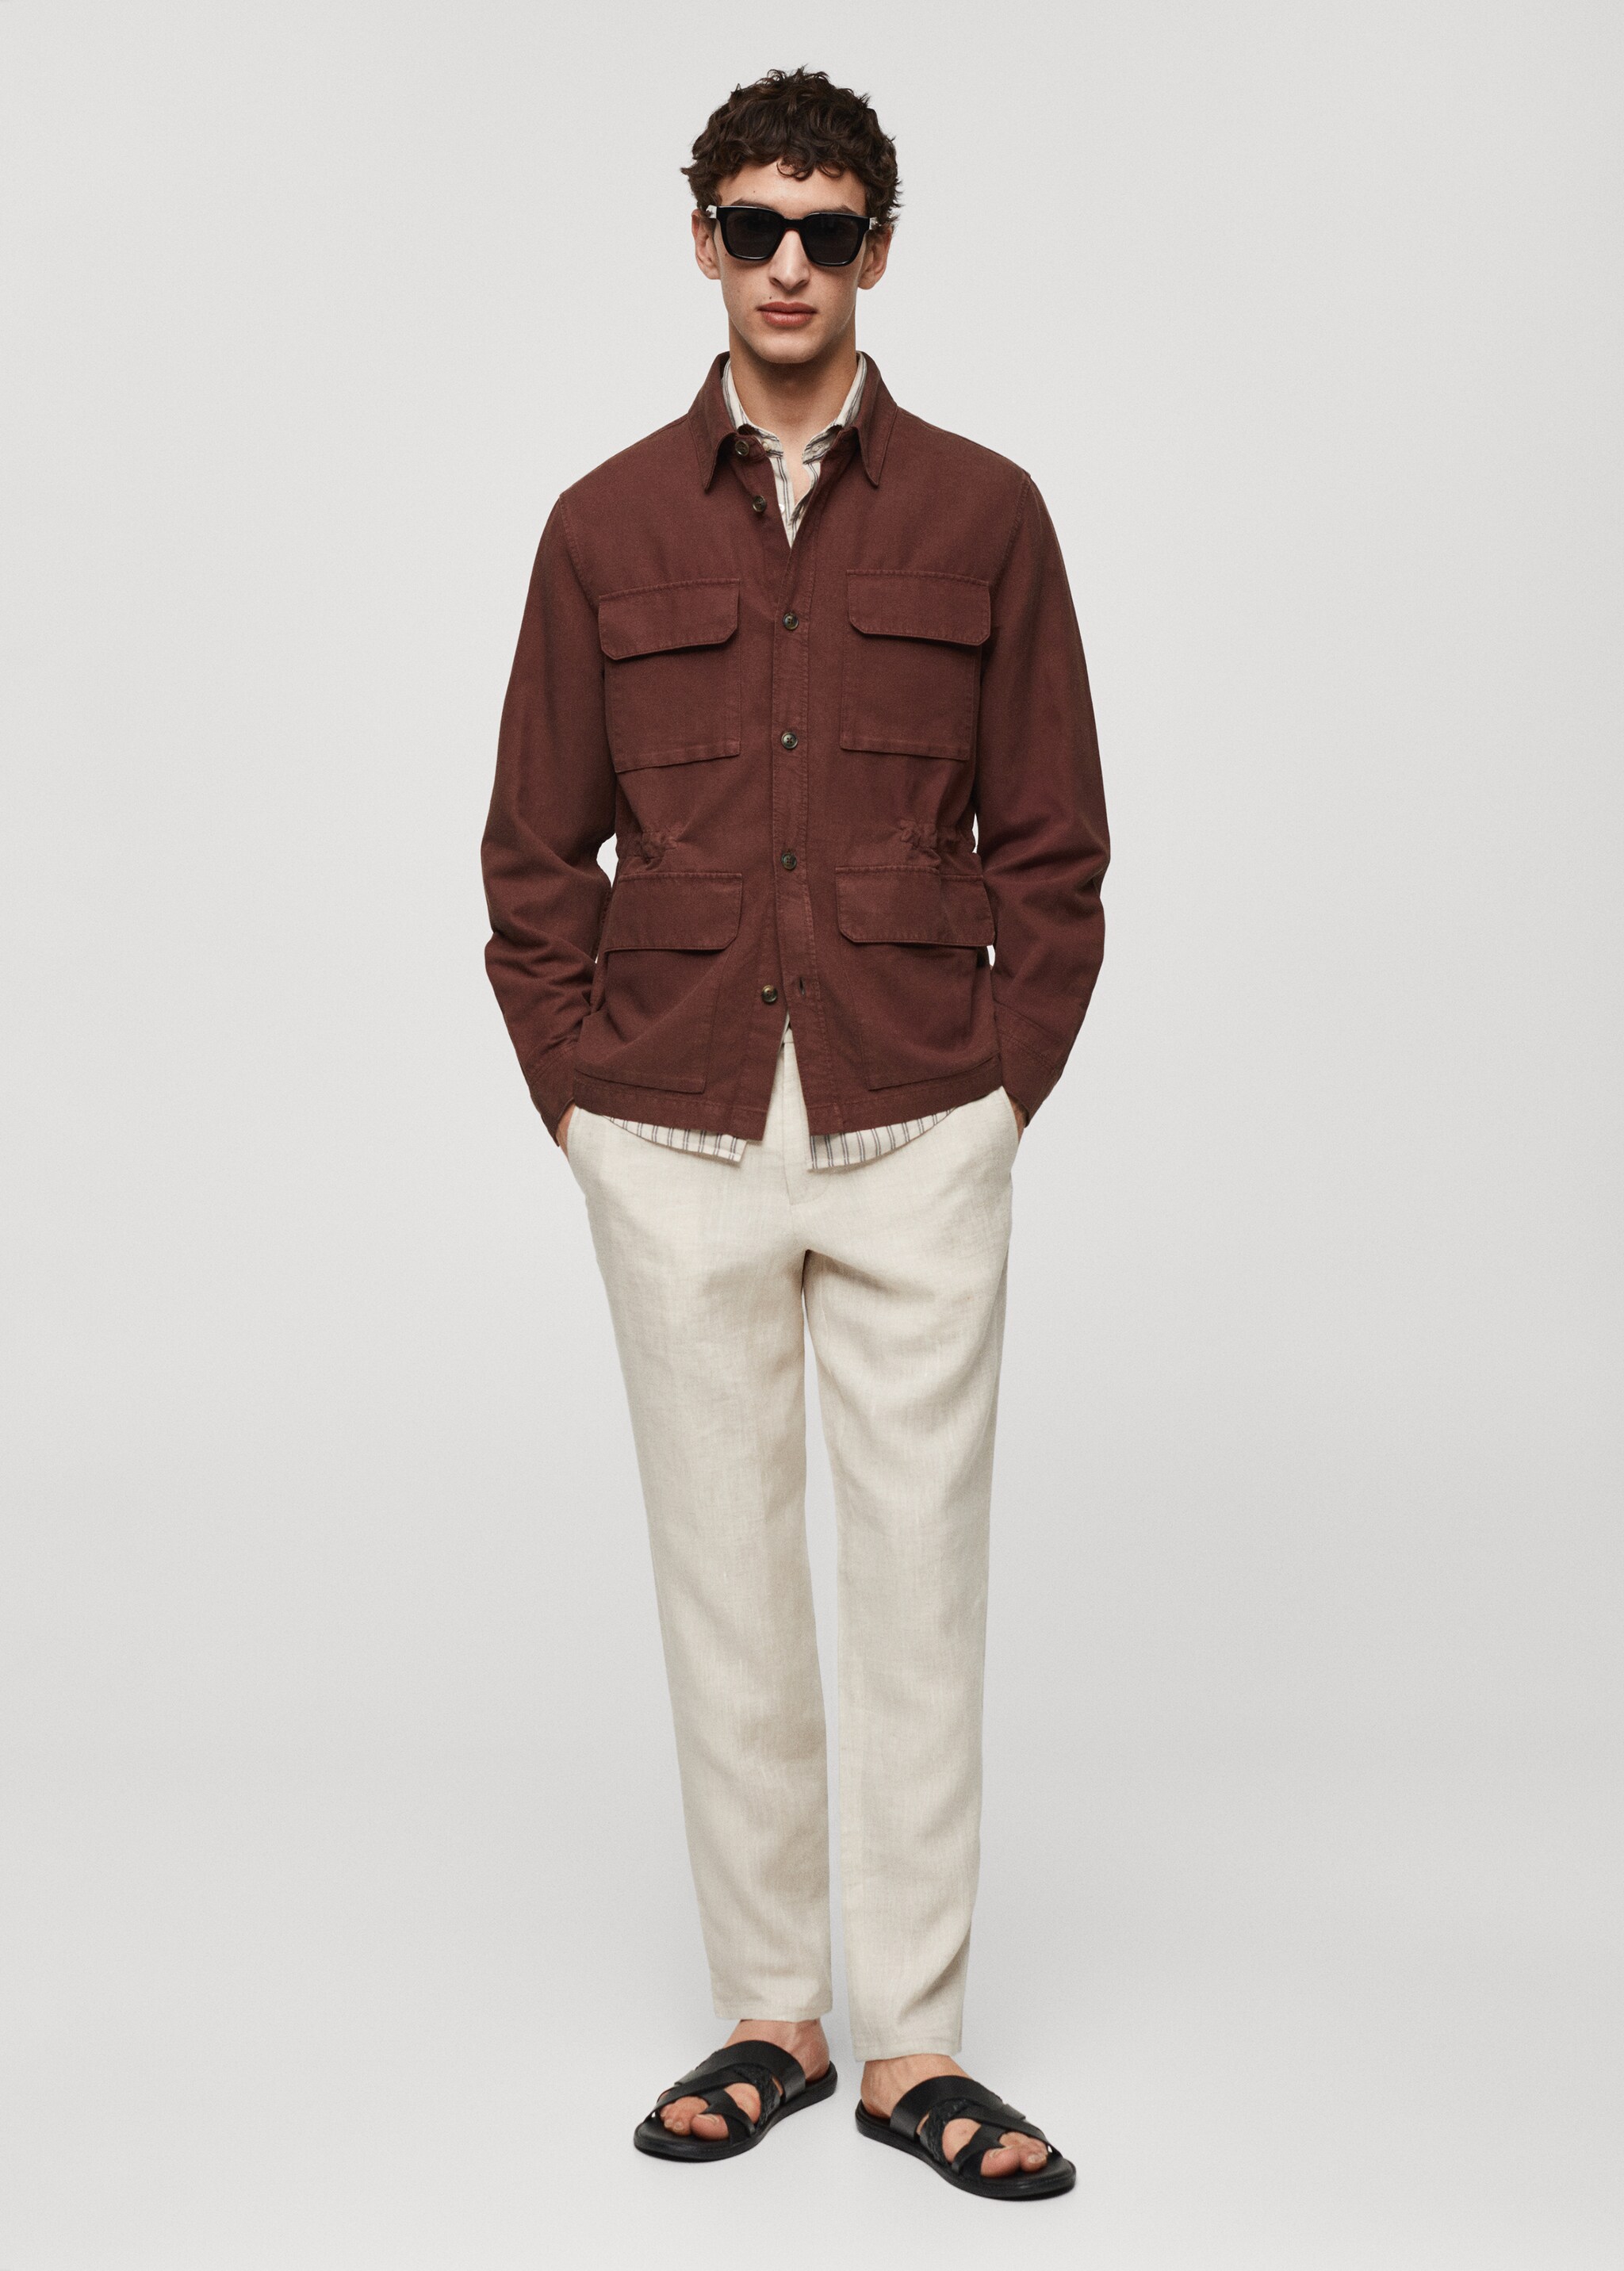 Linen overshirt with pockets - General plane